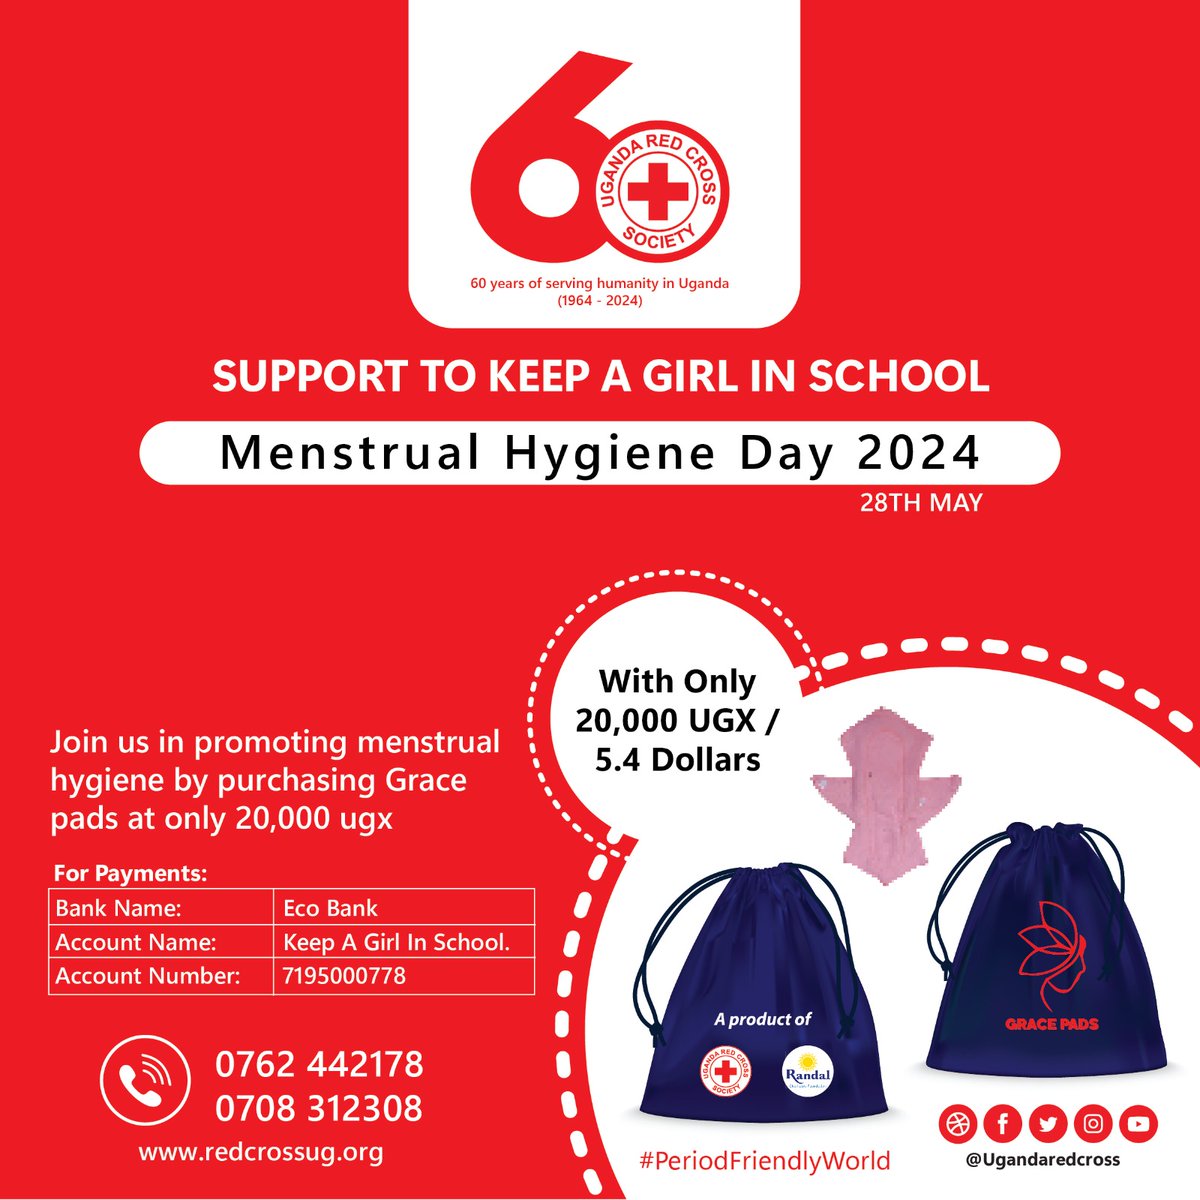 May 28 is the International Day of Action for Women's Health. It is also the World Menstrual Hygiene Day. This year, the theme is #PeriodFriendlyWorld. This day is dedicated to encouraging women and girls to maintain hygiene during their menstrual cycle to stay healthy.